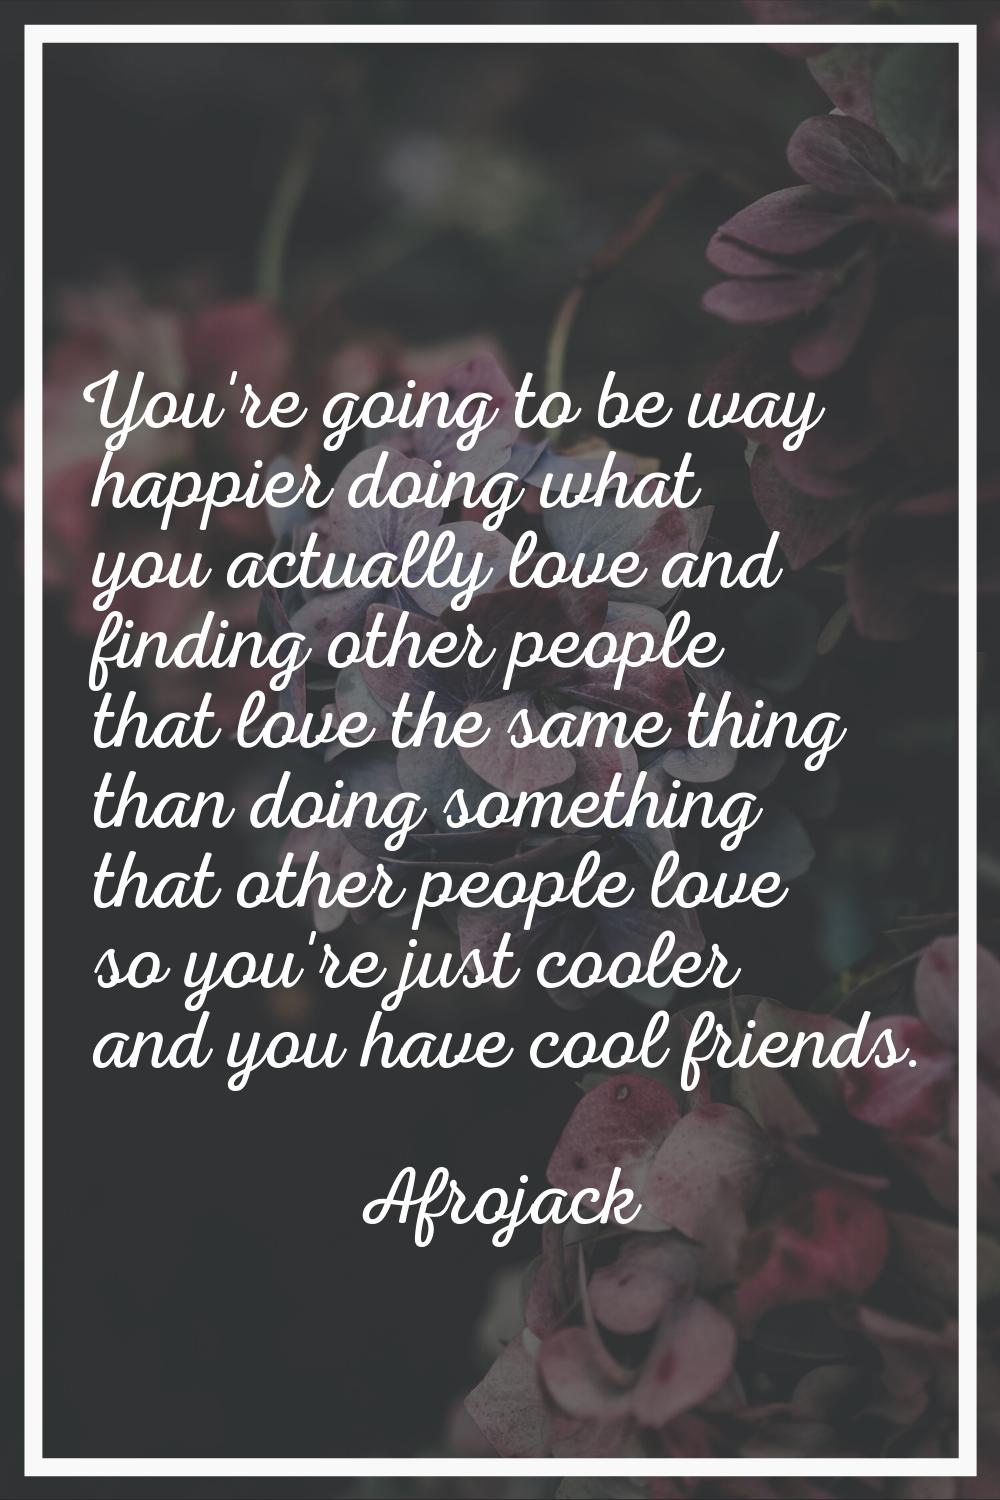 You're going to be way happier doing what you actually love and finding other people that love the 